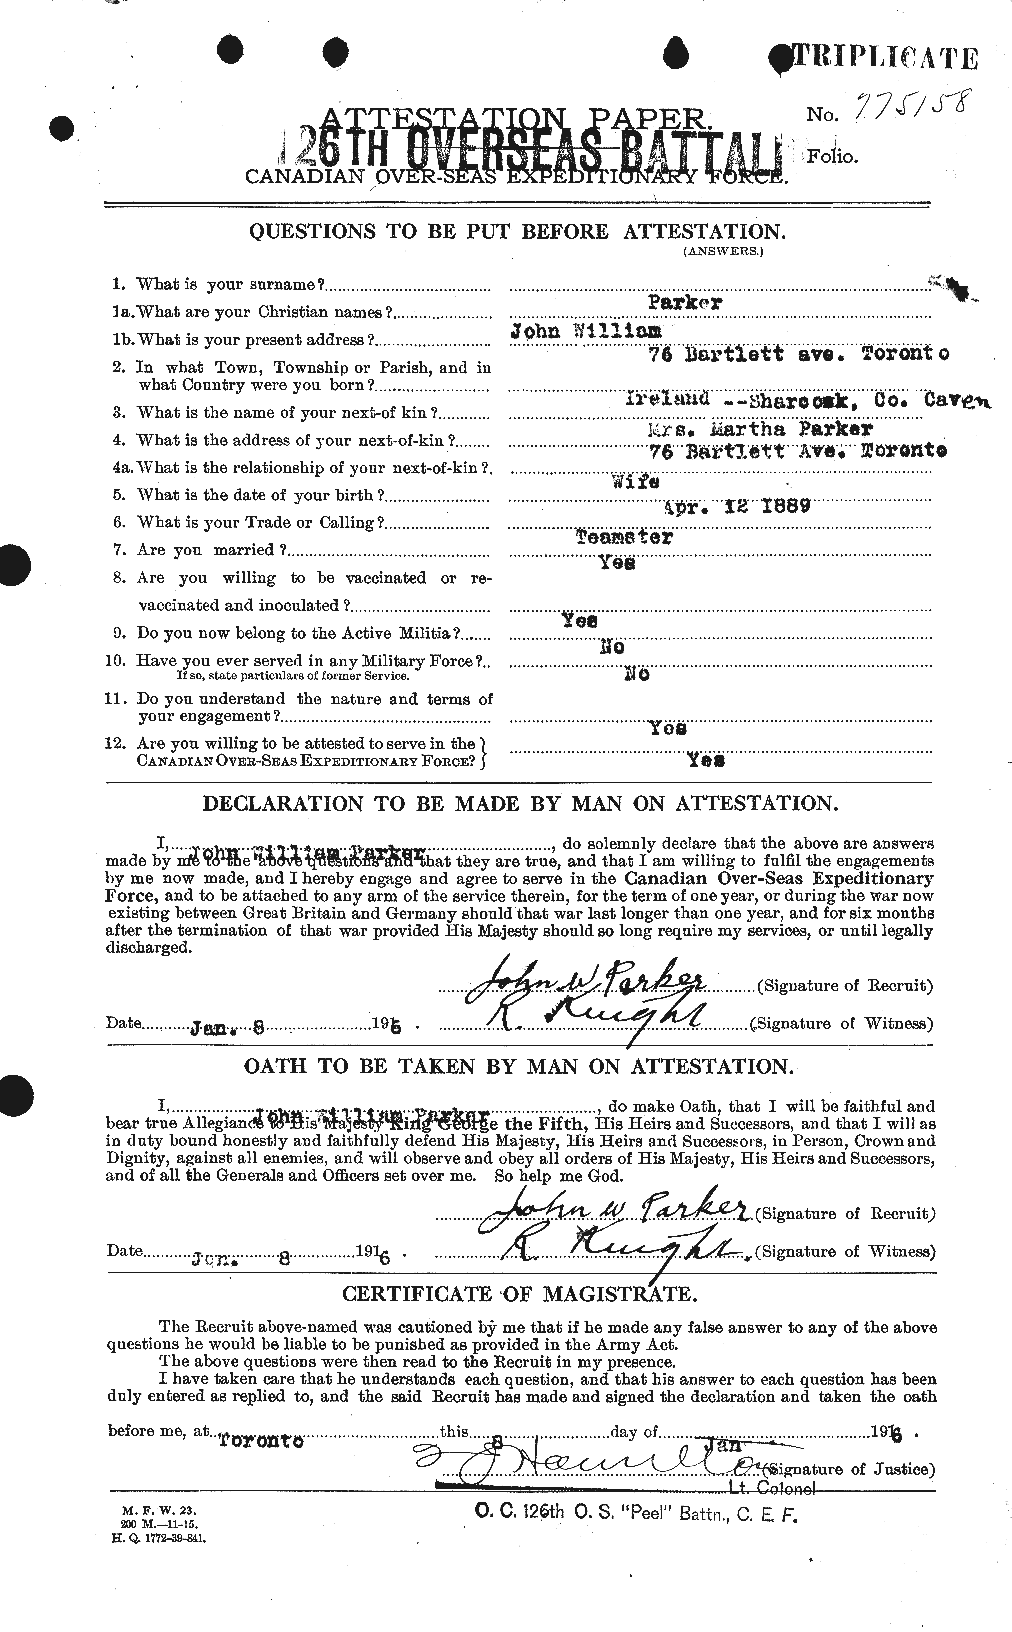 Personnel Records of the First World War - CEF 565497a